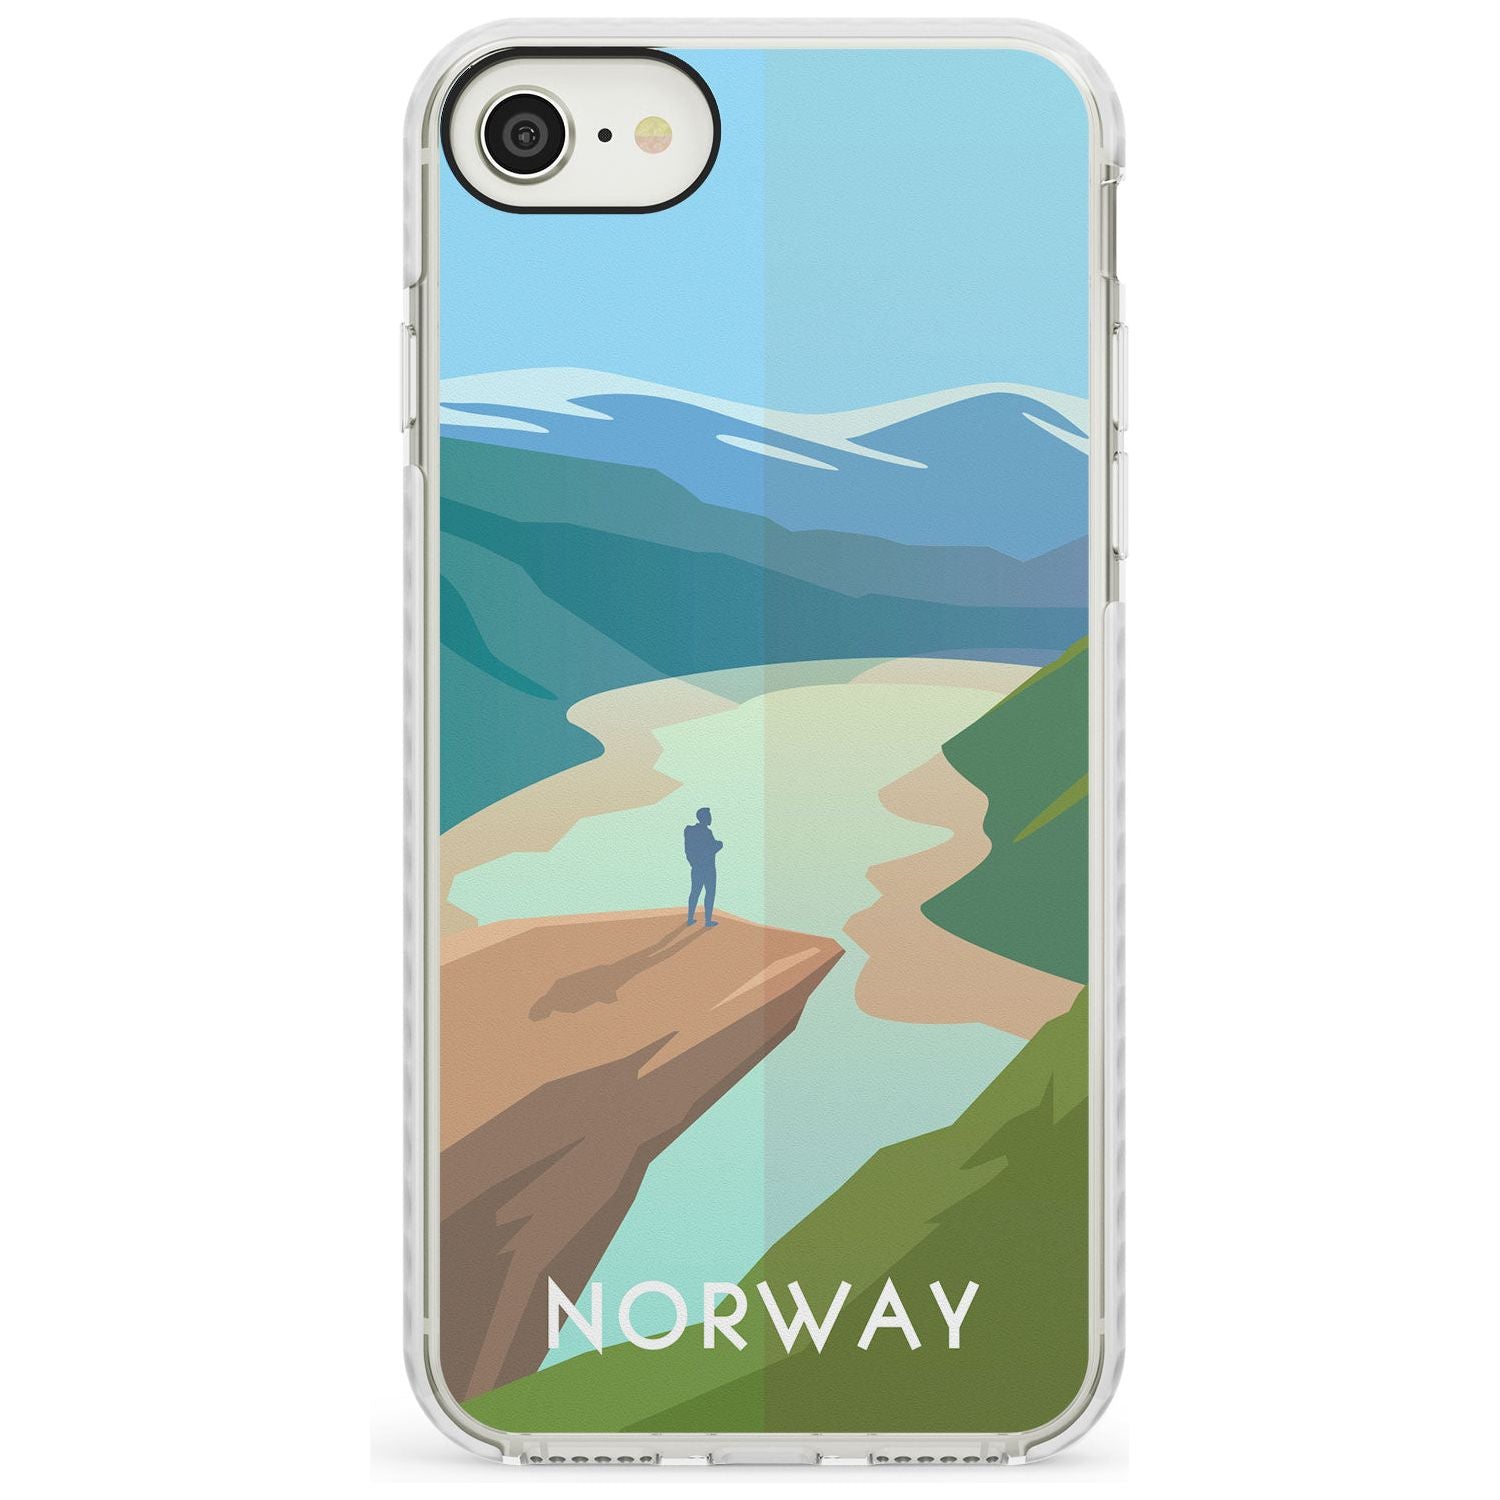 Vintage Travel Poster Norway Impact Phone Case for iPhone SE 8 7 Plus